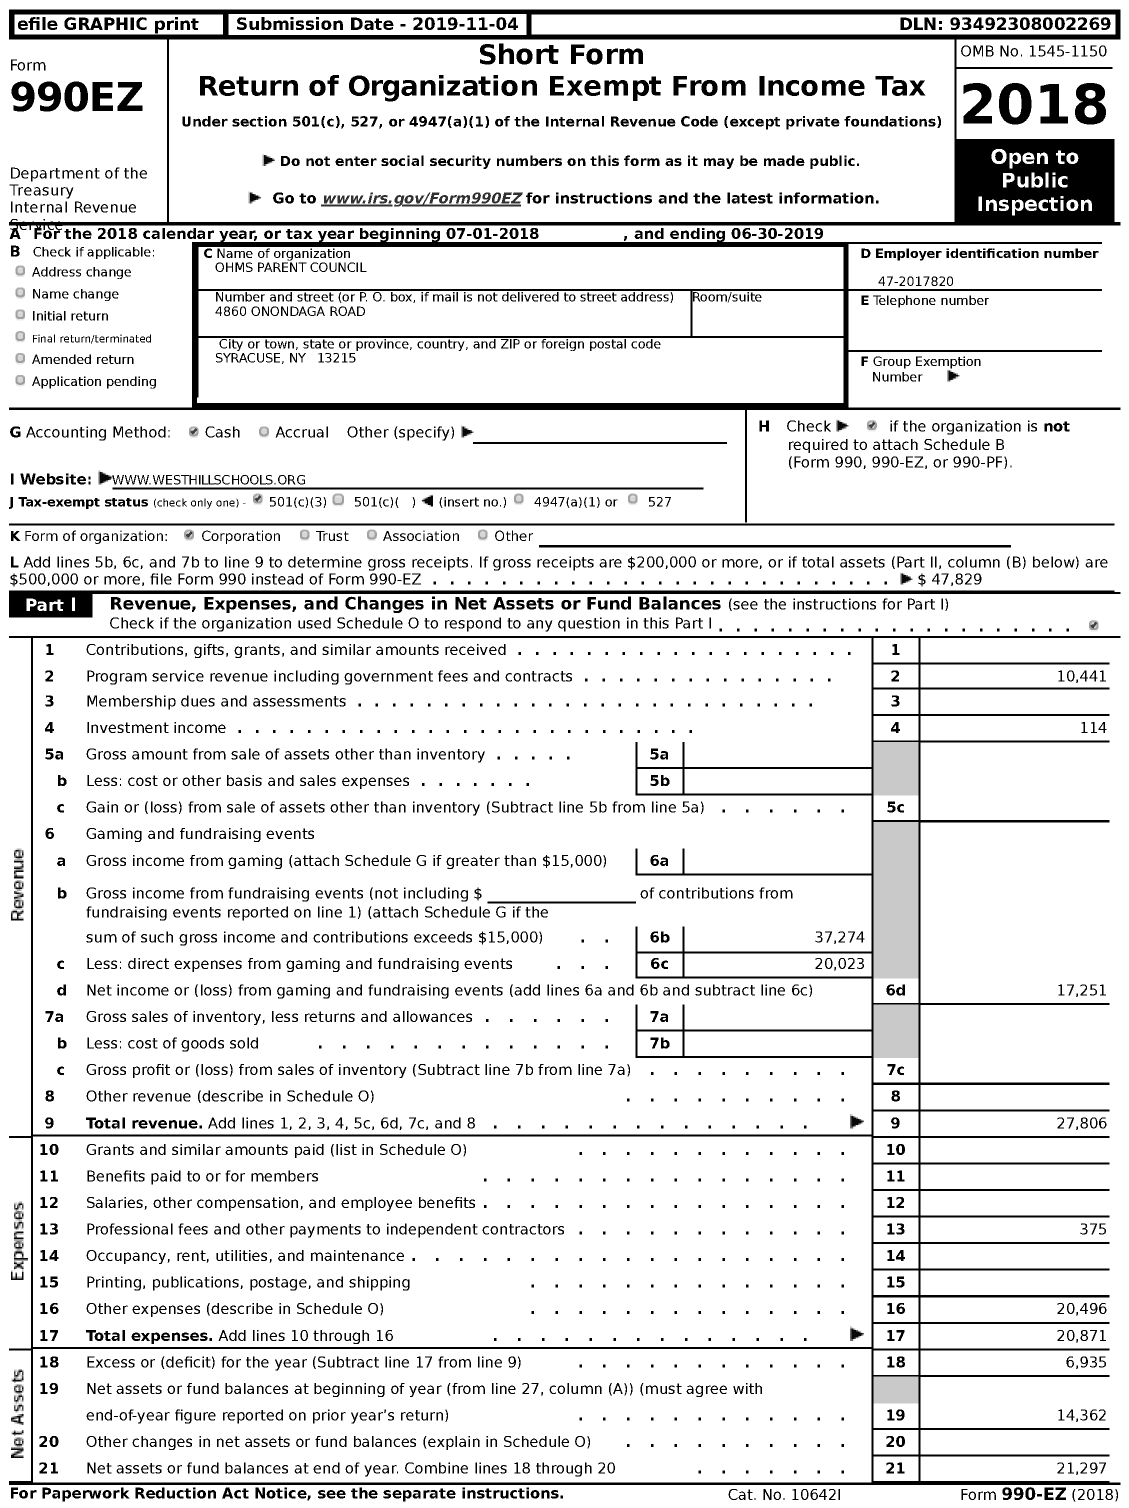 Image of first page of 2018 Form 990EZ for Ohms Parent Council